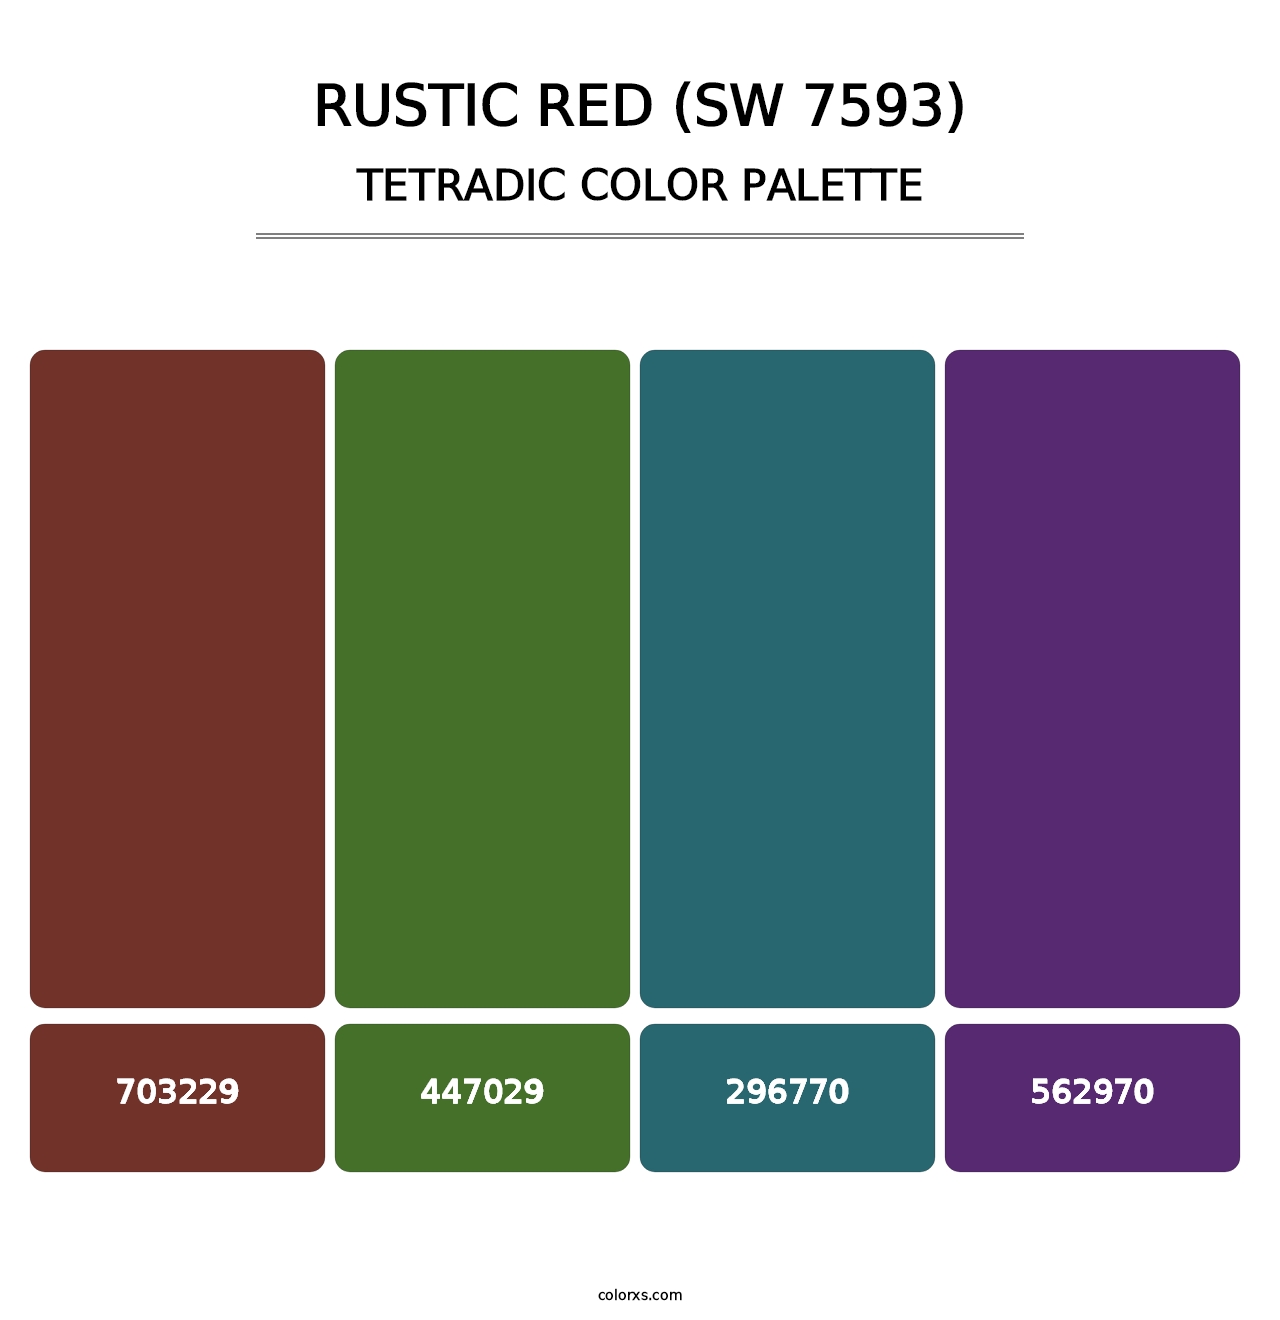 Rustic Red (SW 7593) - Tetradic Color Palette